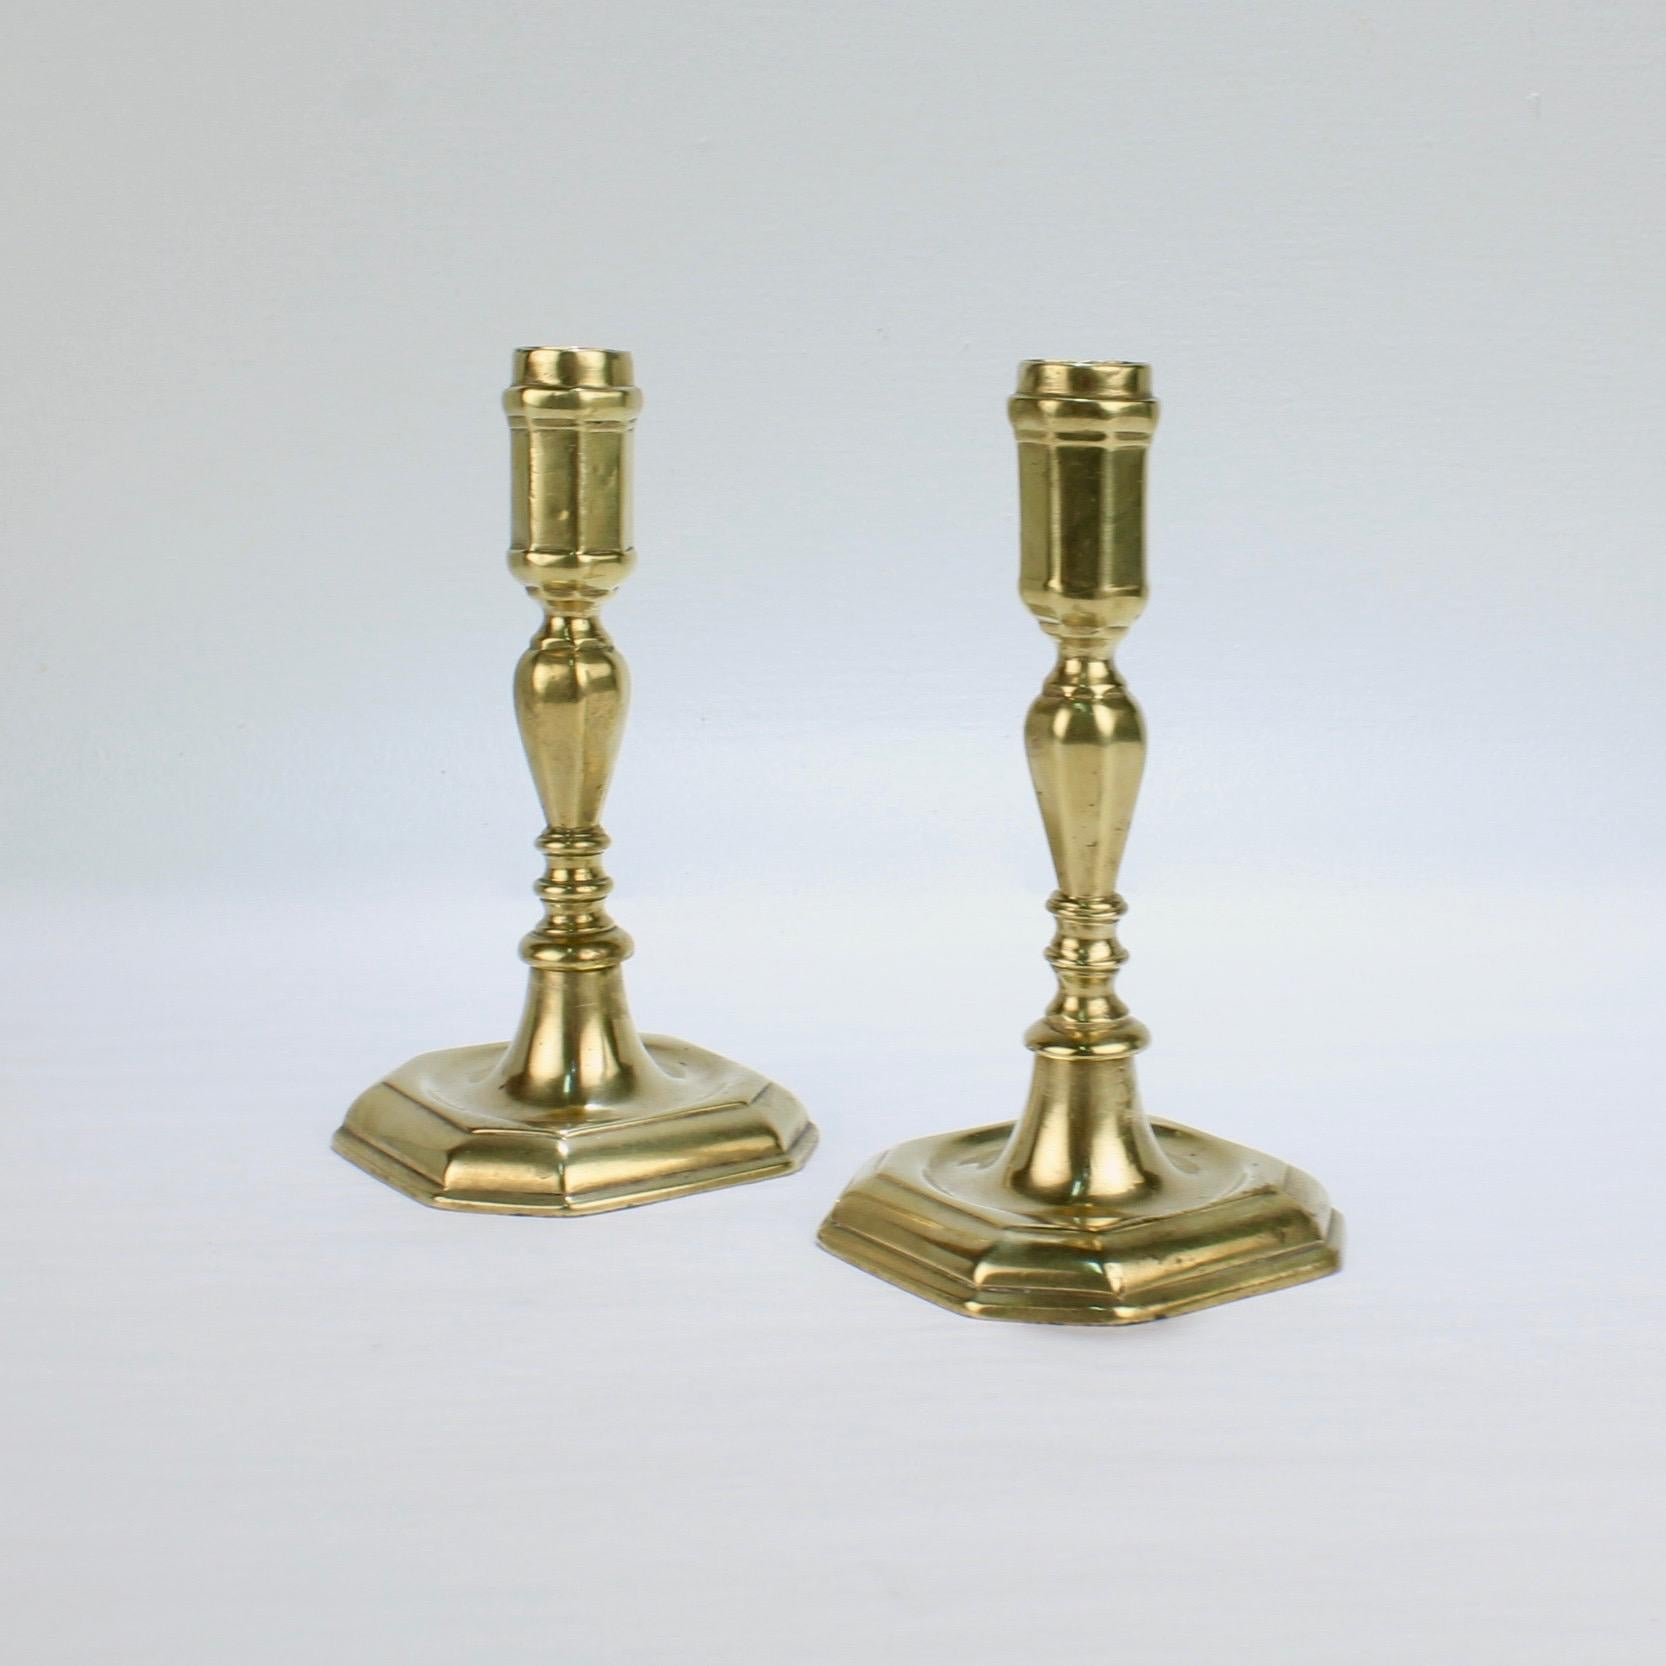 Pair of Early 18th Century French or English Faceted Brass Candlesticks In Good Condition For Sale In Philadelphia, PA